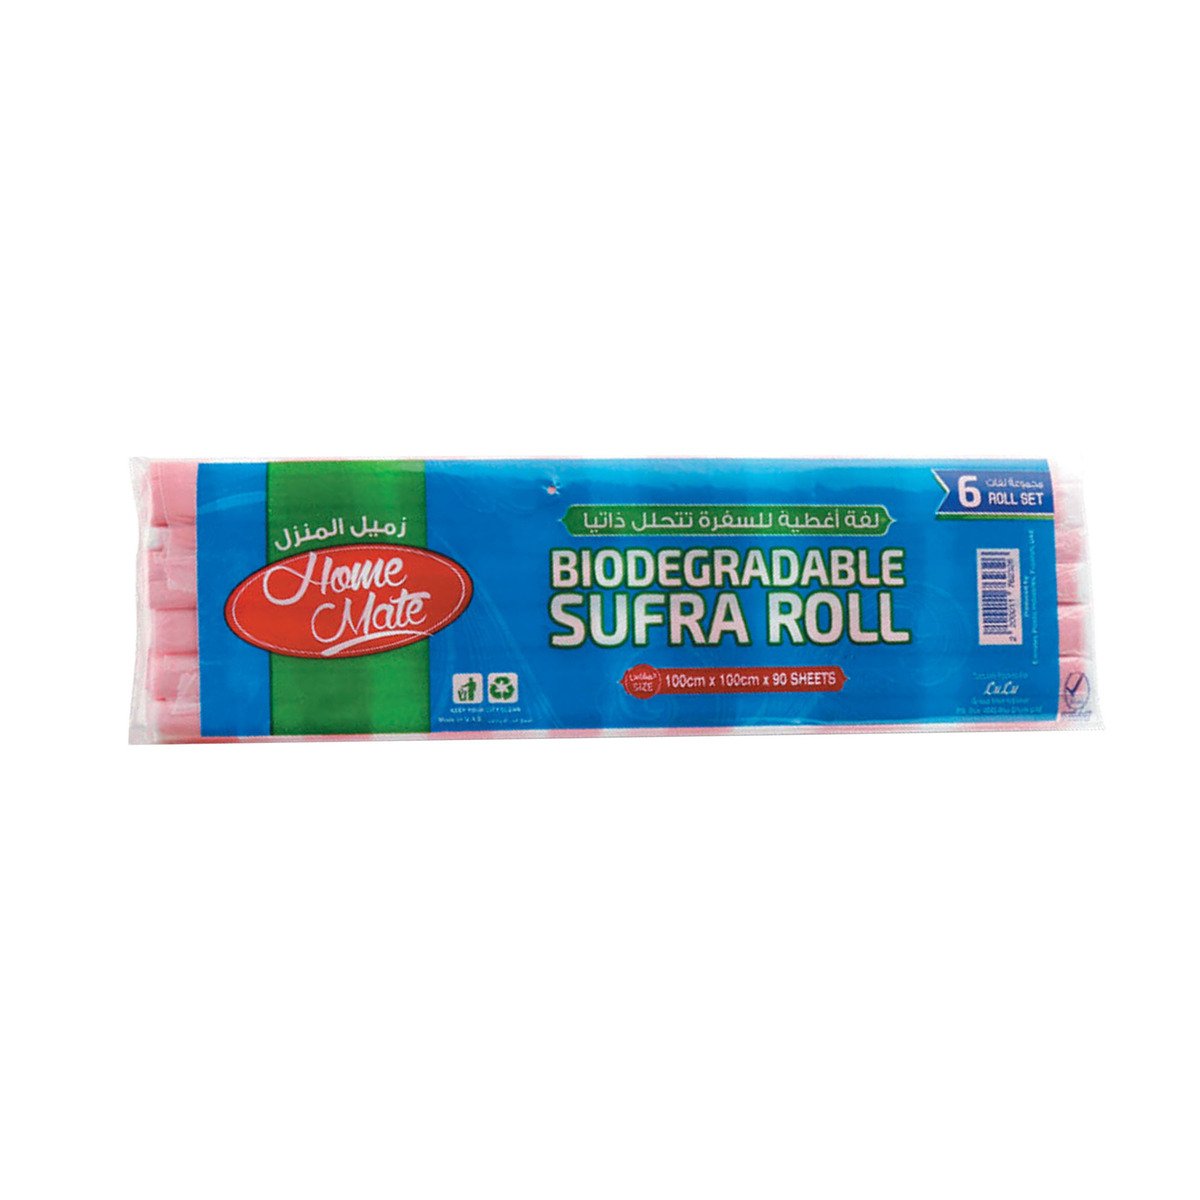 Home Mate Biodegradable Sufra Roll Size 100cm x 100cm 6 x 90 Sheets 2 pkt